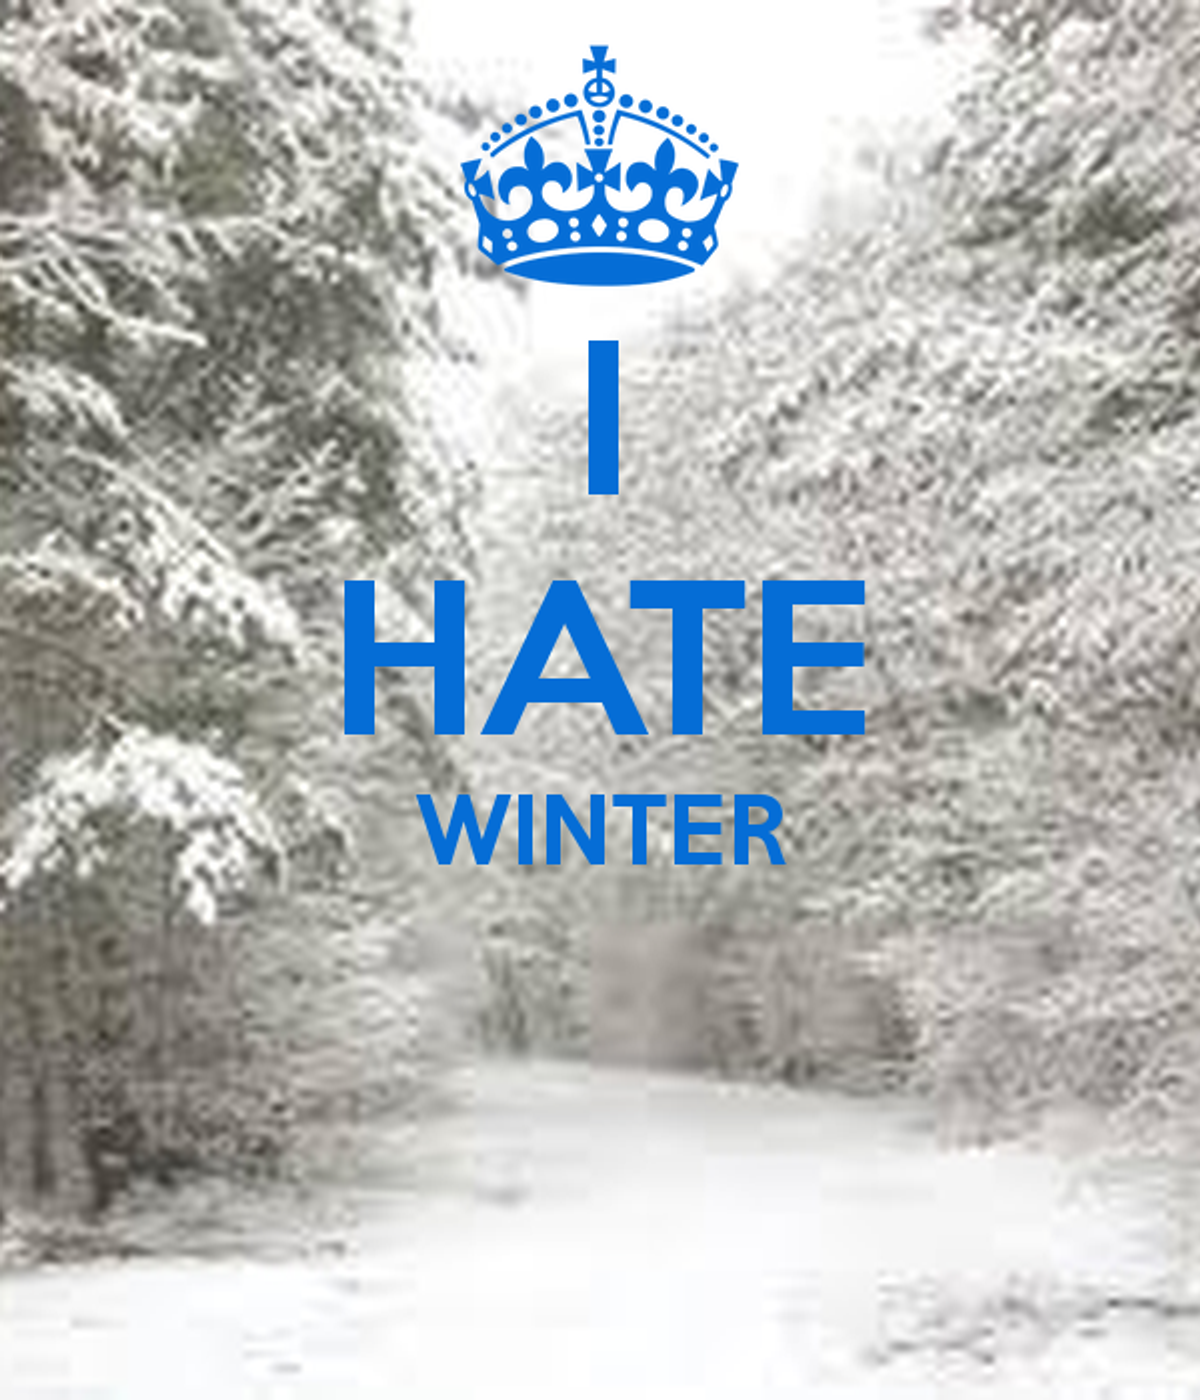 7 Signs You're Not a Winter Person